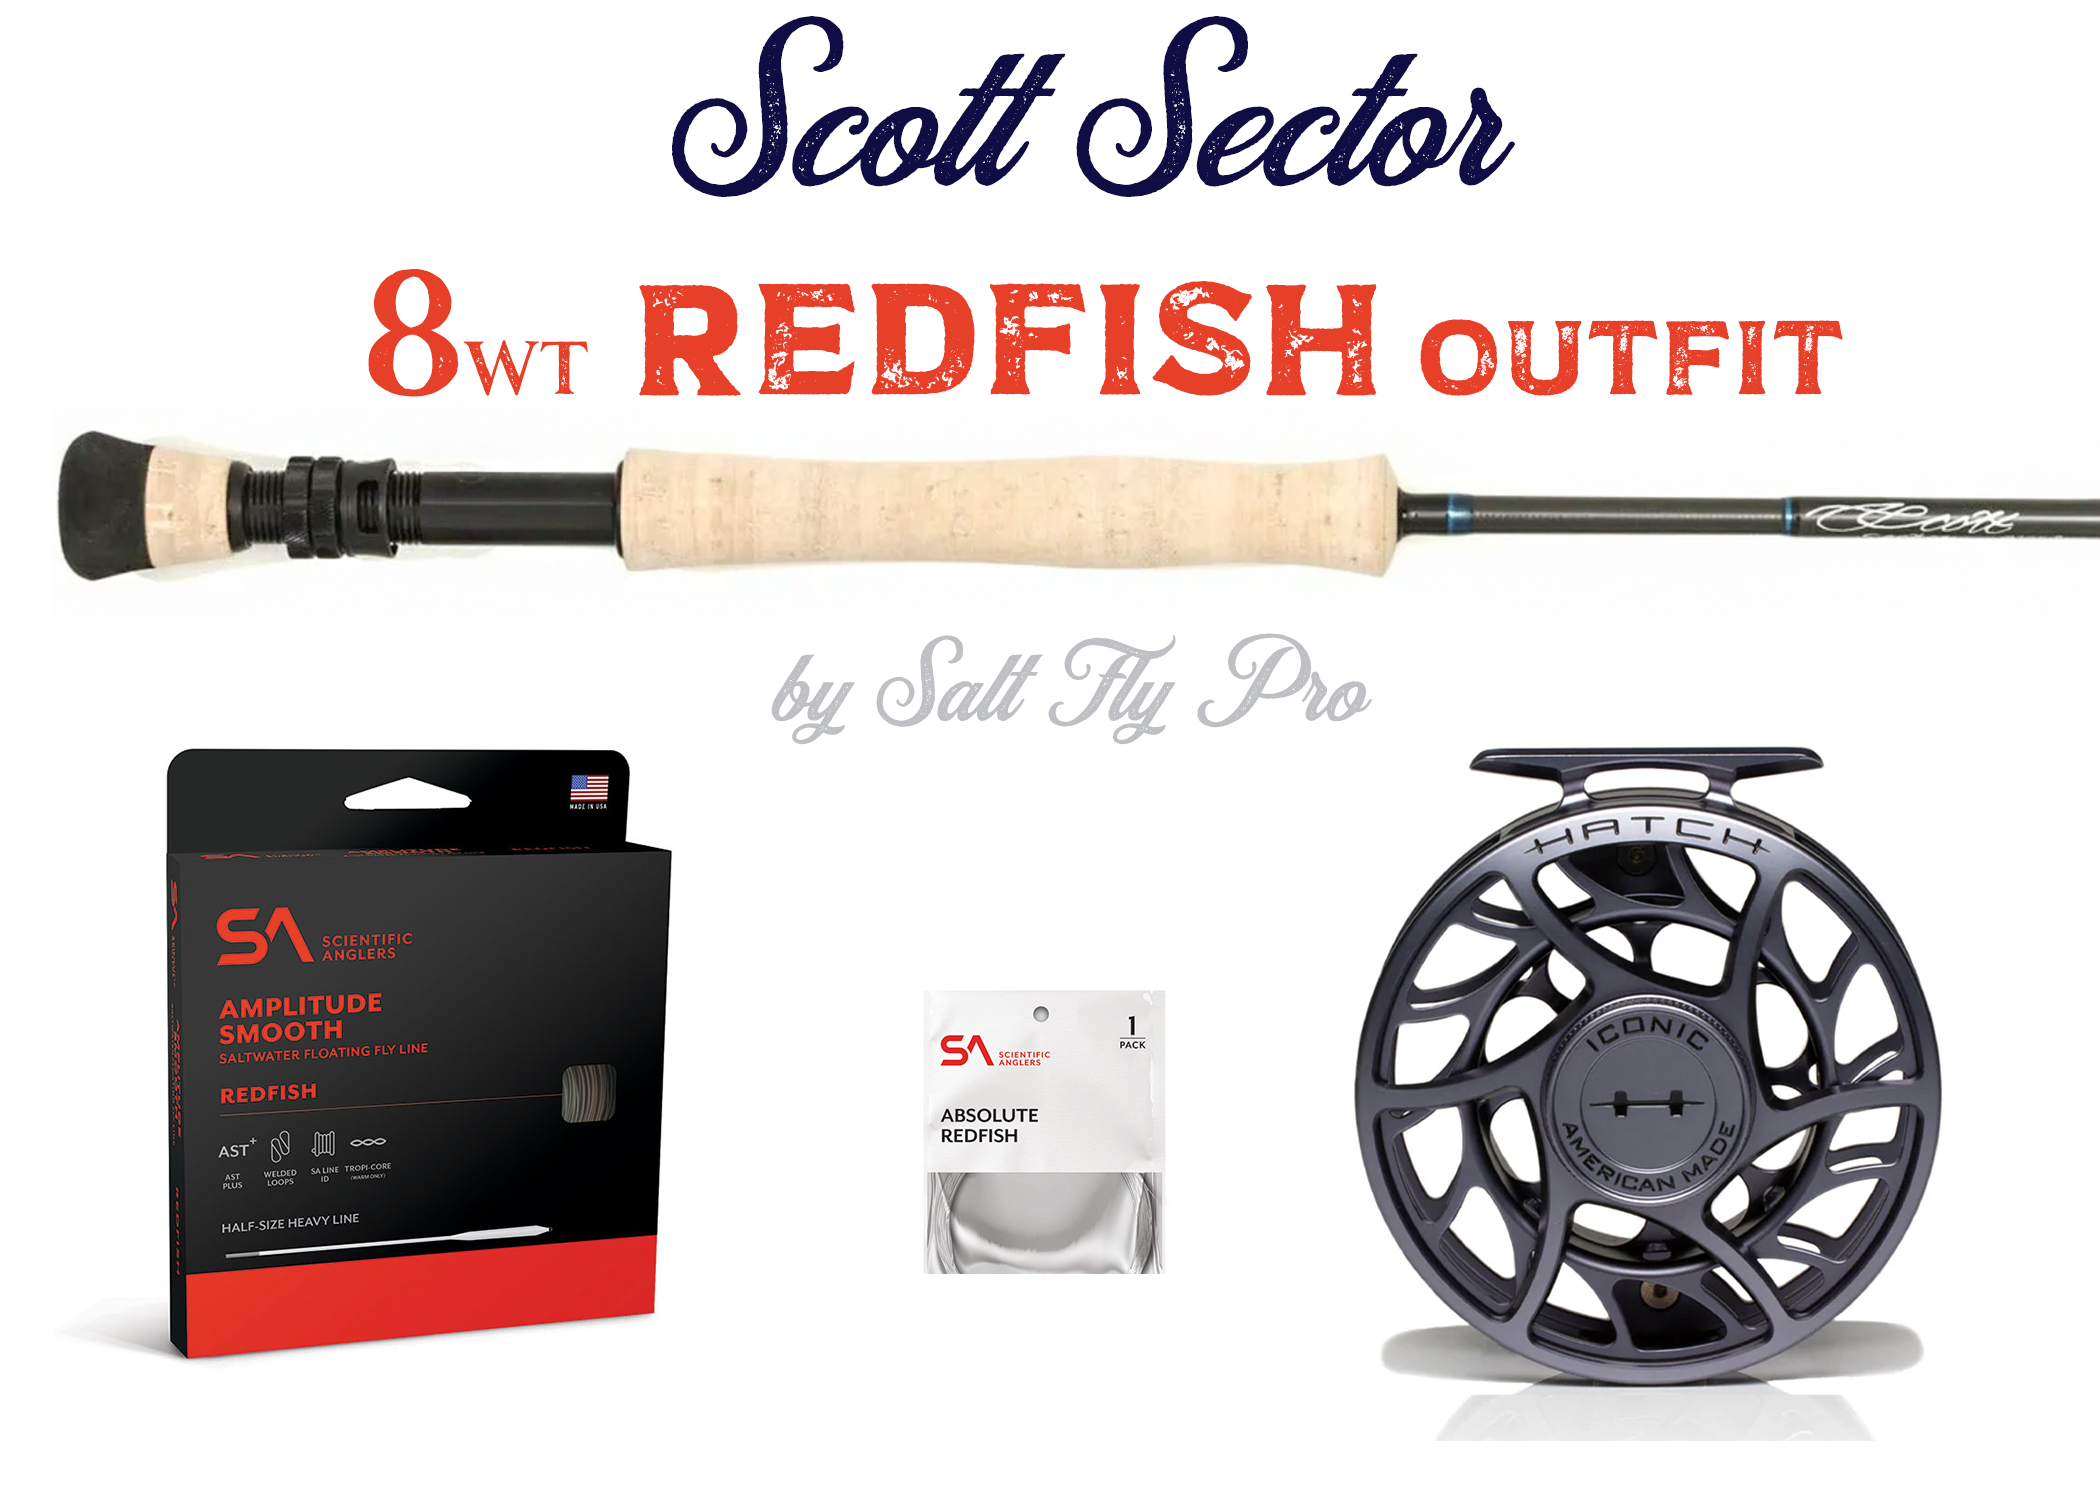 Scott Sector 8wt REDFISH Outfit Combo - NEW!